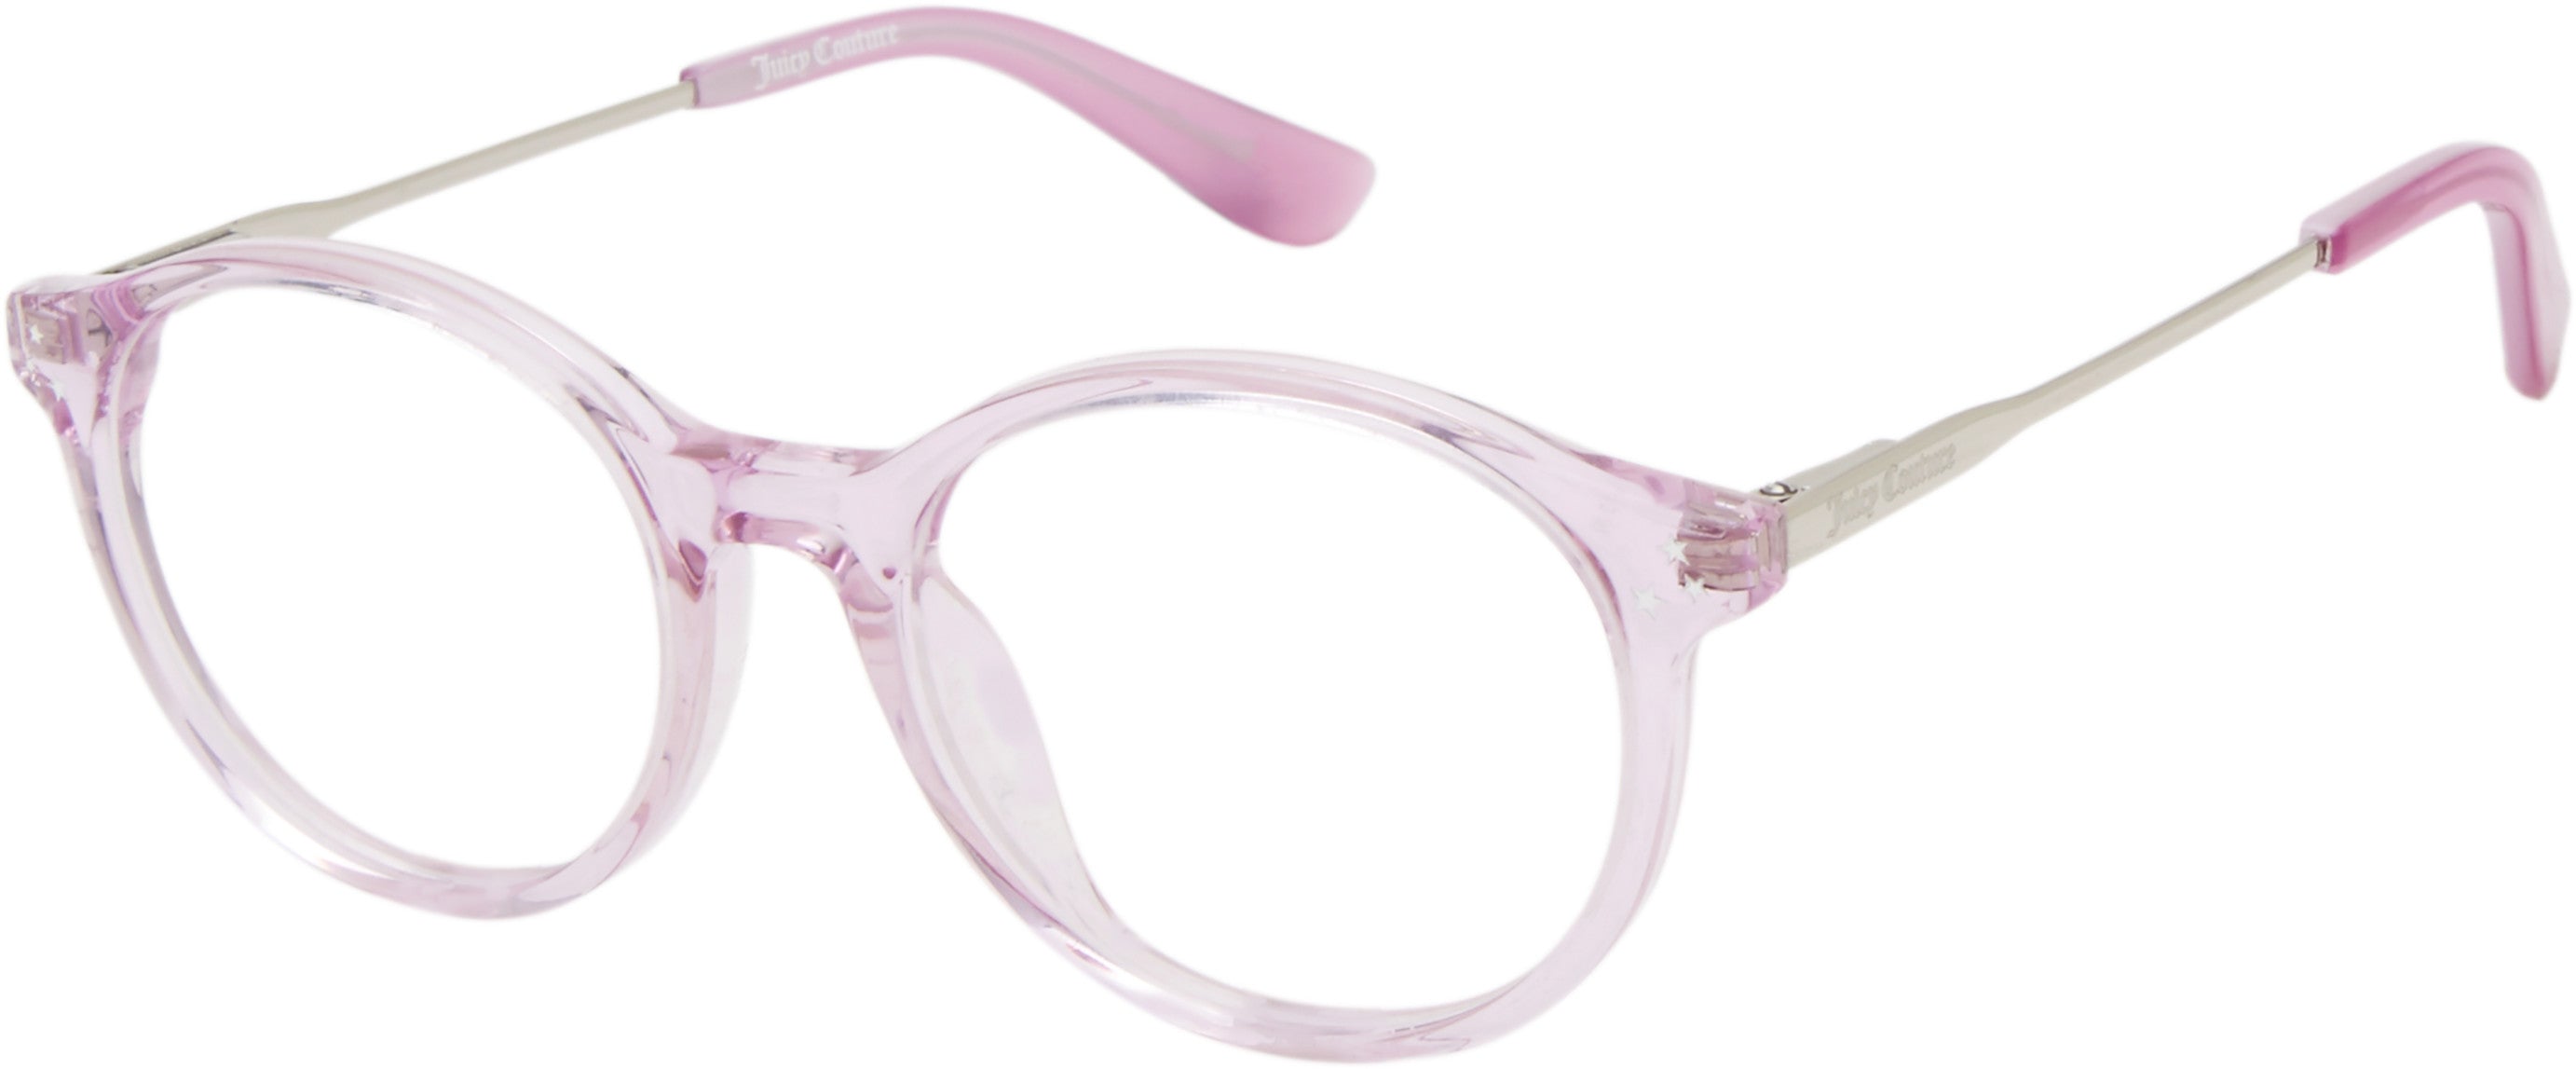 Juicy Couture Juicy 942 Oval Modified Eyeglasses 0789-0789  Lilac (00 Demo Lens)